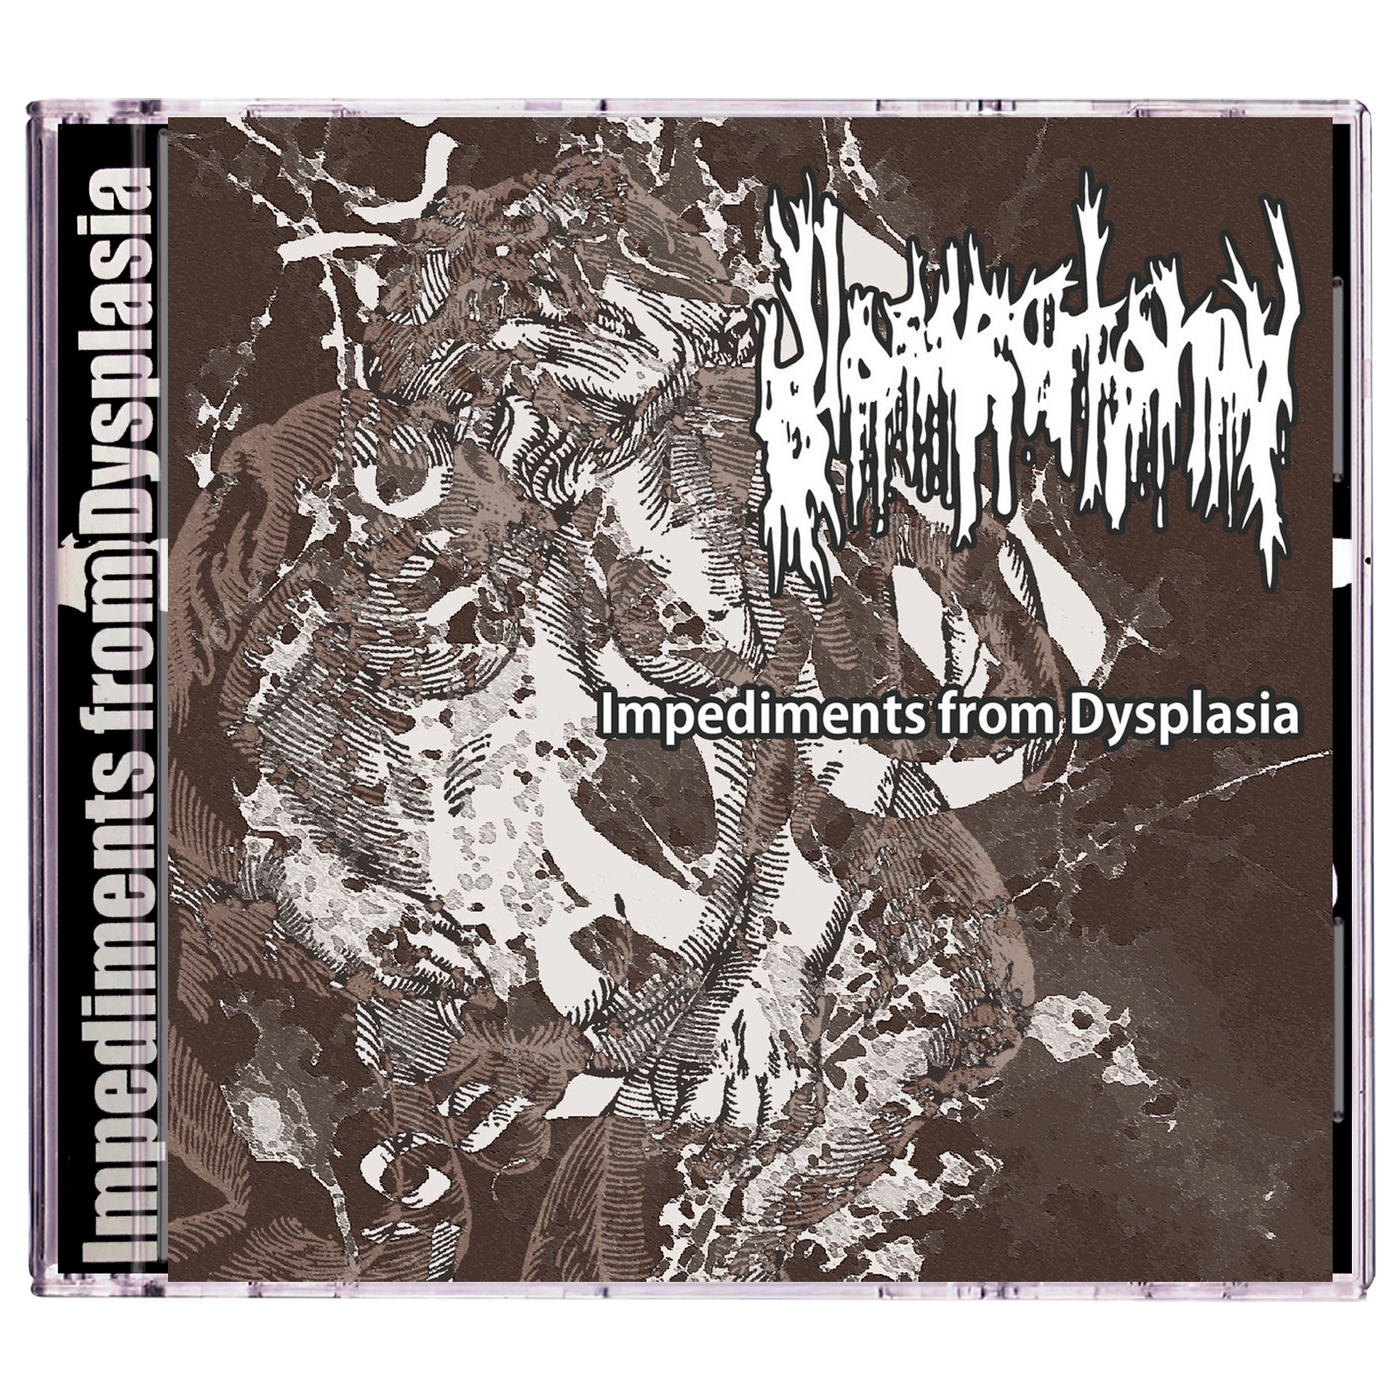 Glossectomy 'Impediments From Dysplasia' CD